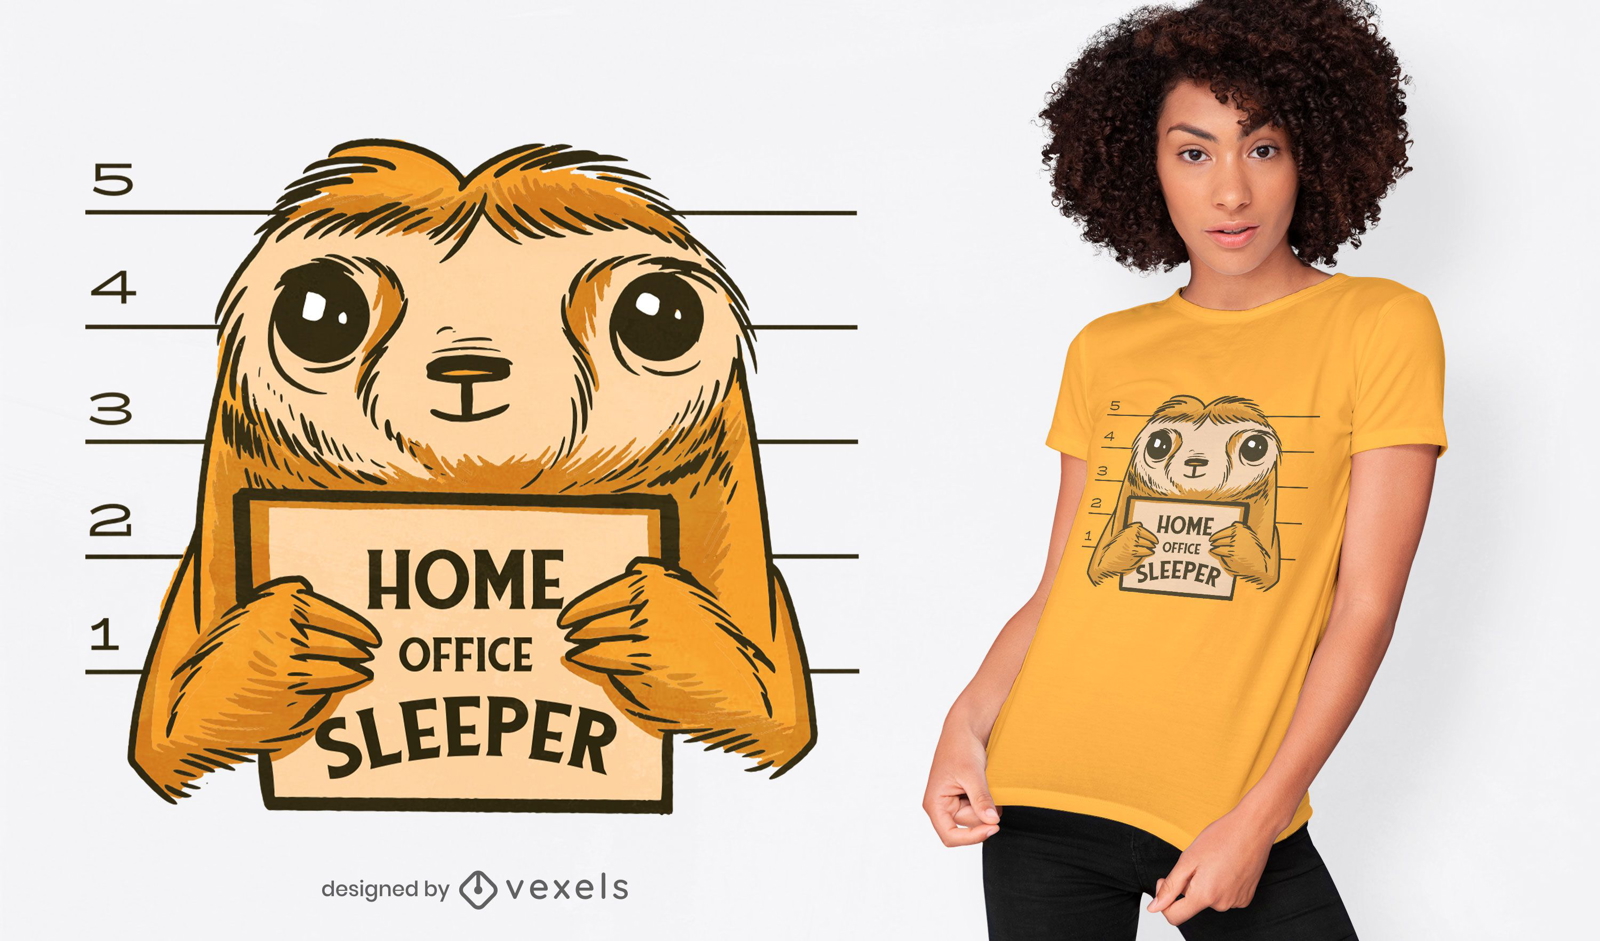 Home office sloth t-shirt design